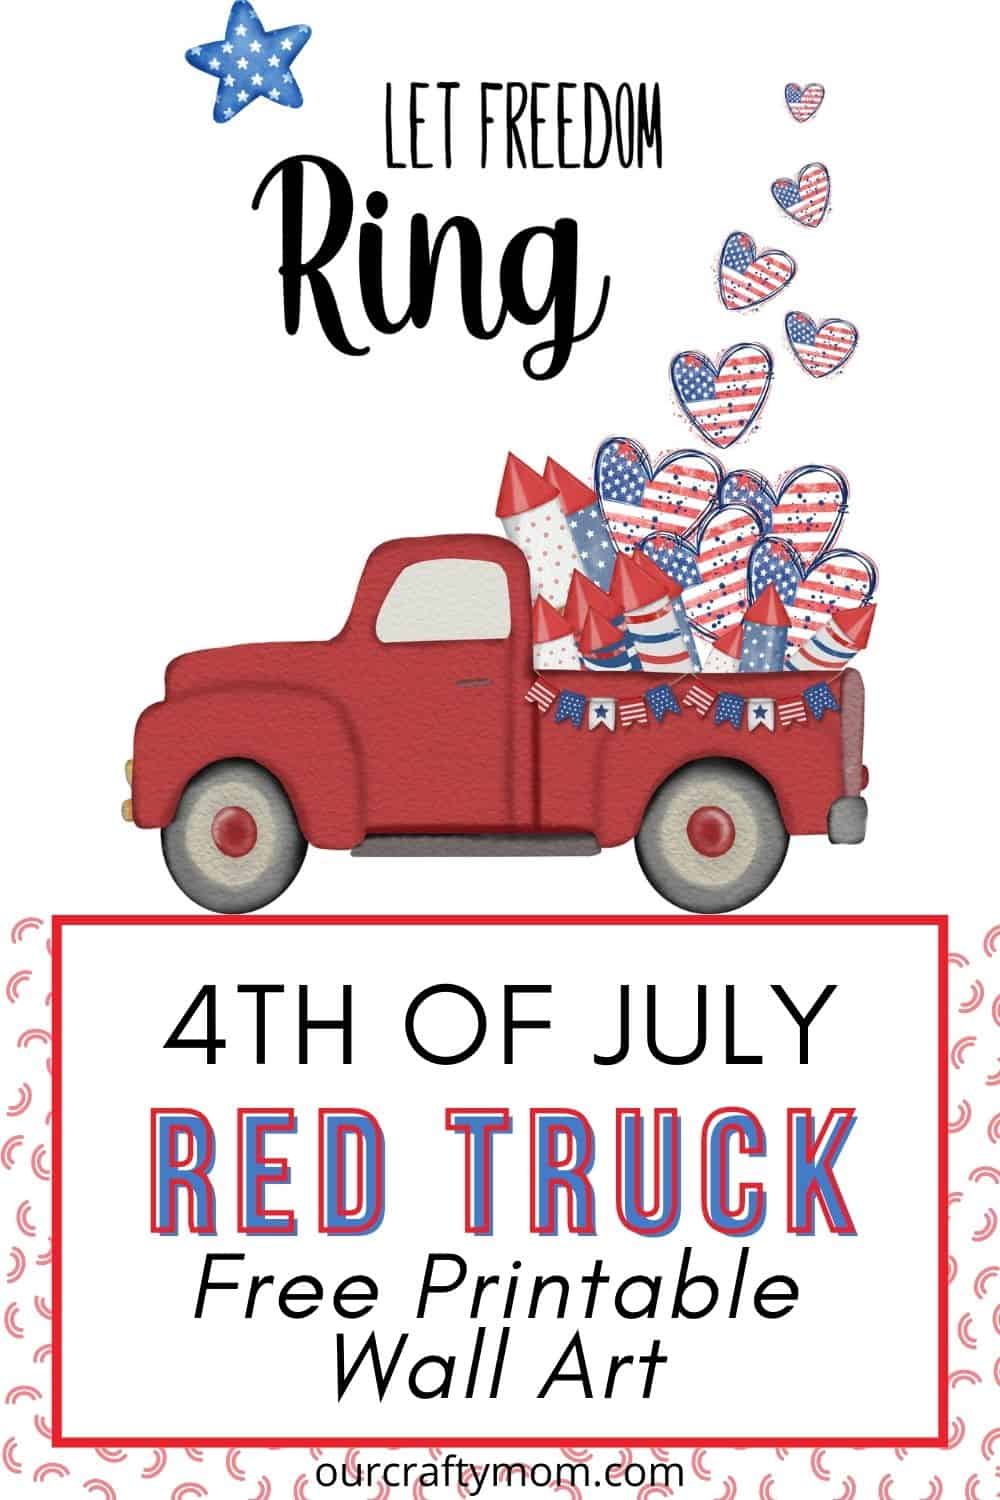 let freedom ring little red truck free printable